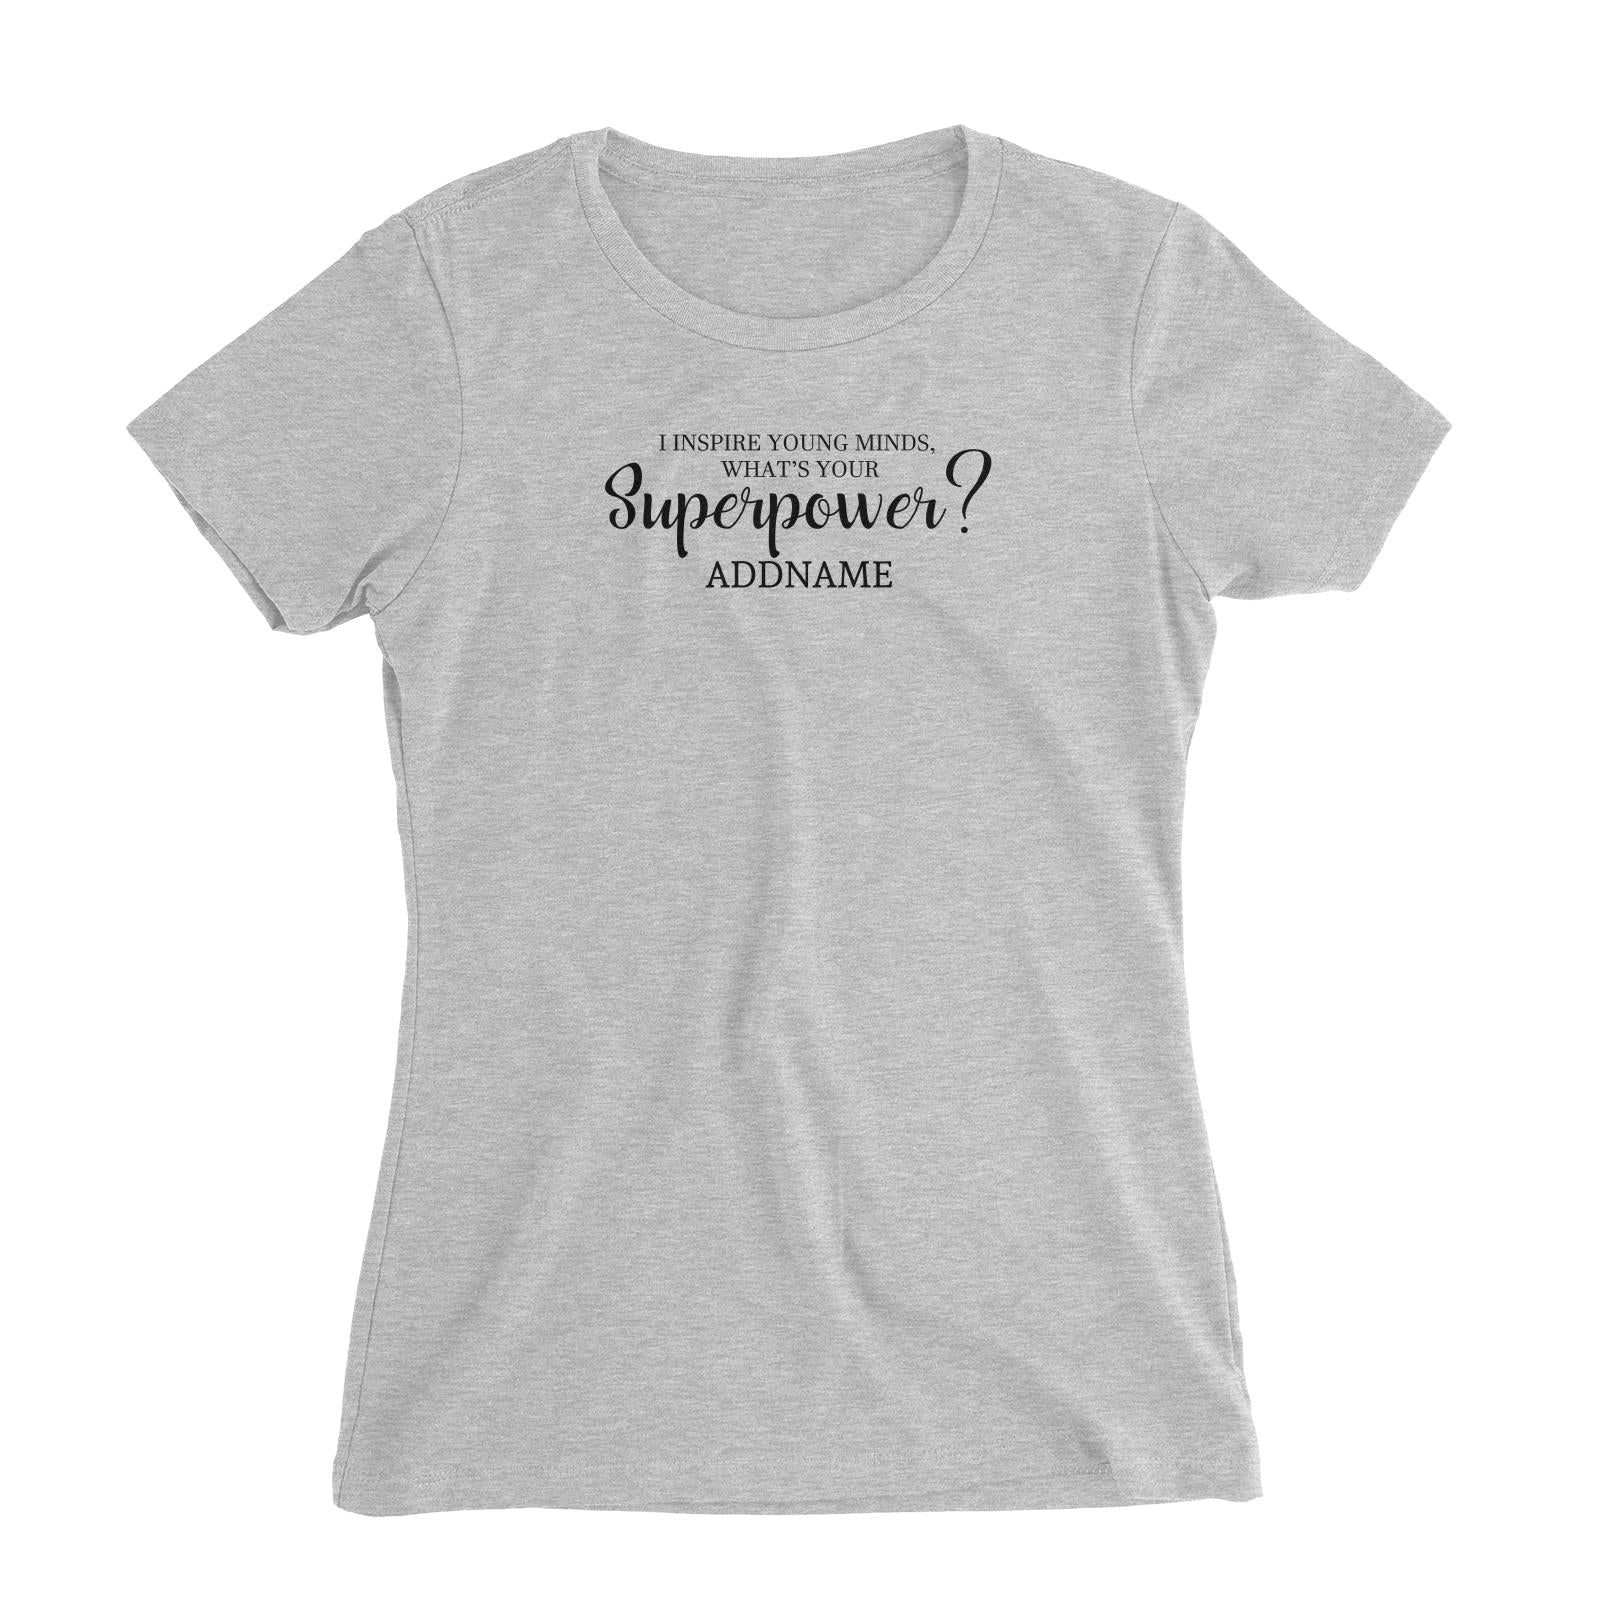 Super Teachers I Inspire Young Minds What's Your Superpower Addname Women's Slim Fit T-Shirt